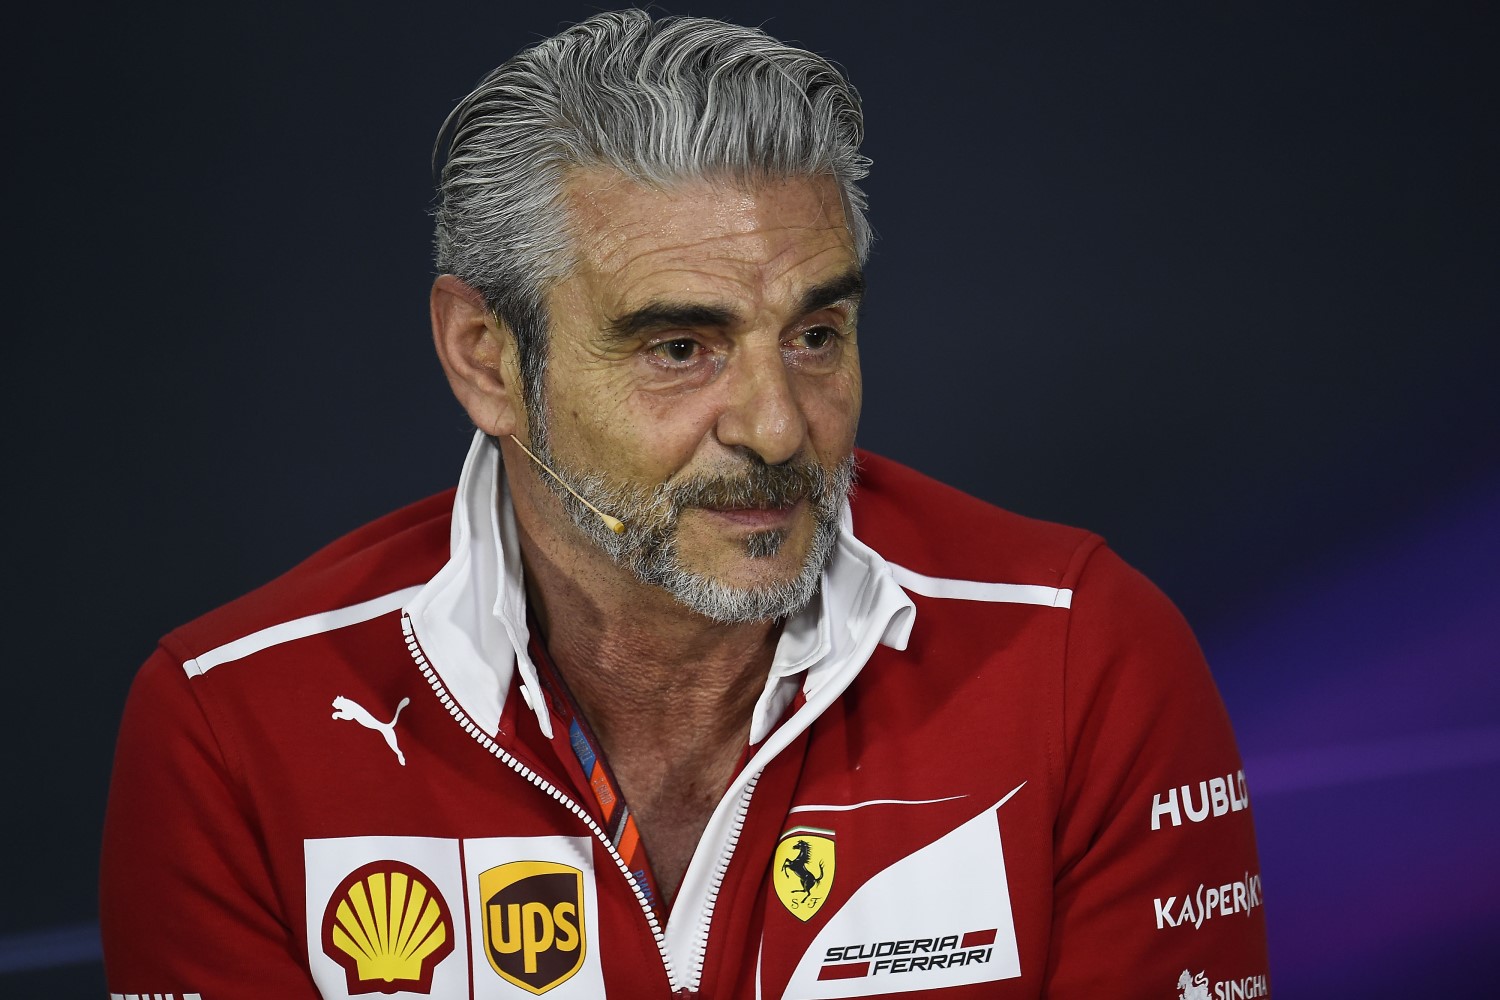 Arrivabene doesn't care